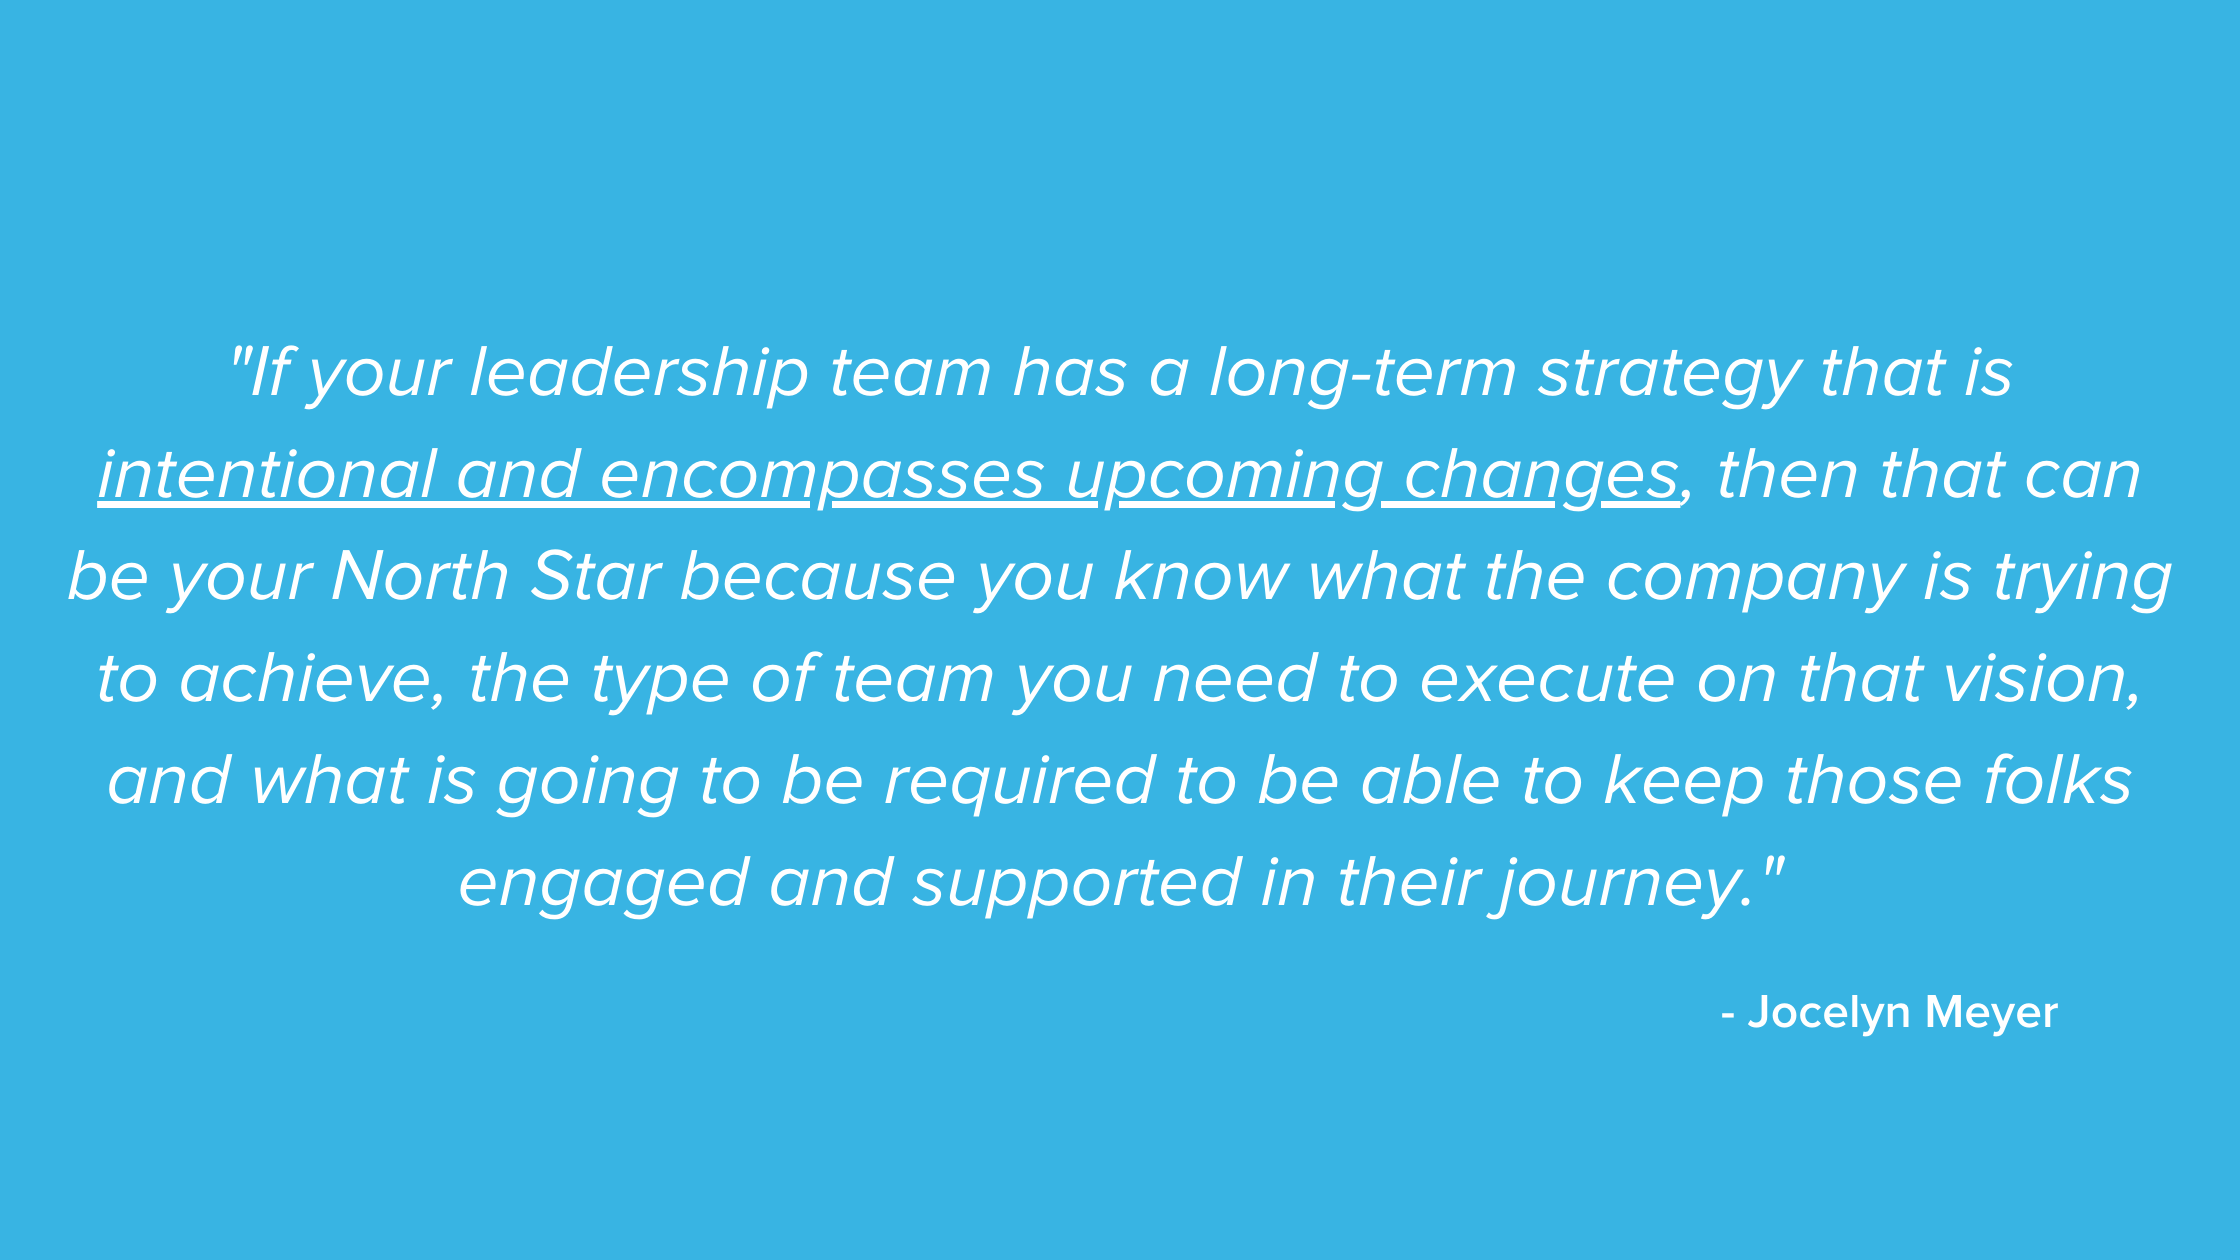 A blue background with overlaid white text. The text reads: ""If your leadership team has a long-term strategy that is intentional and encompasses upcoming changes, then that can be your North Star because you know what the company is trying to achieve, the type of team you need to execute on that vision, and what is going to be required to be able to keep those folks engaged and supported in their journey."